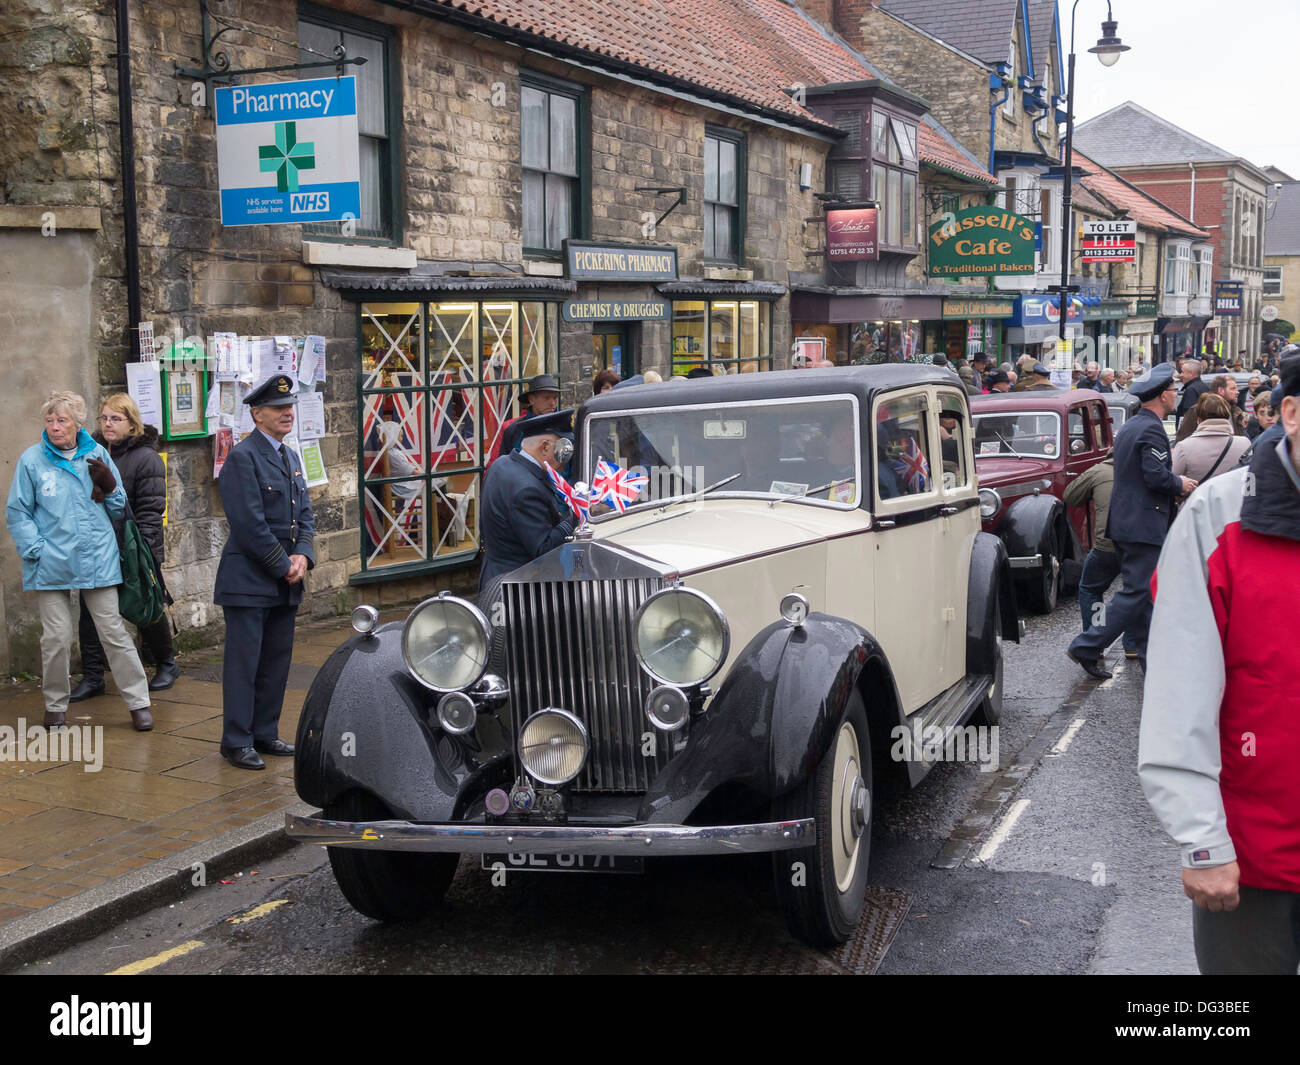 A period Rolls Royce motor car on display in Pickering North Yorkshire England UK for the Wartime and 1940's week-end 2013 Stock Photo